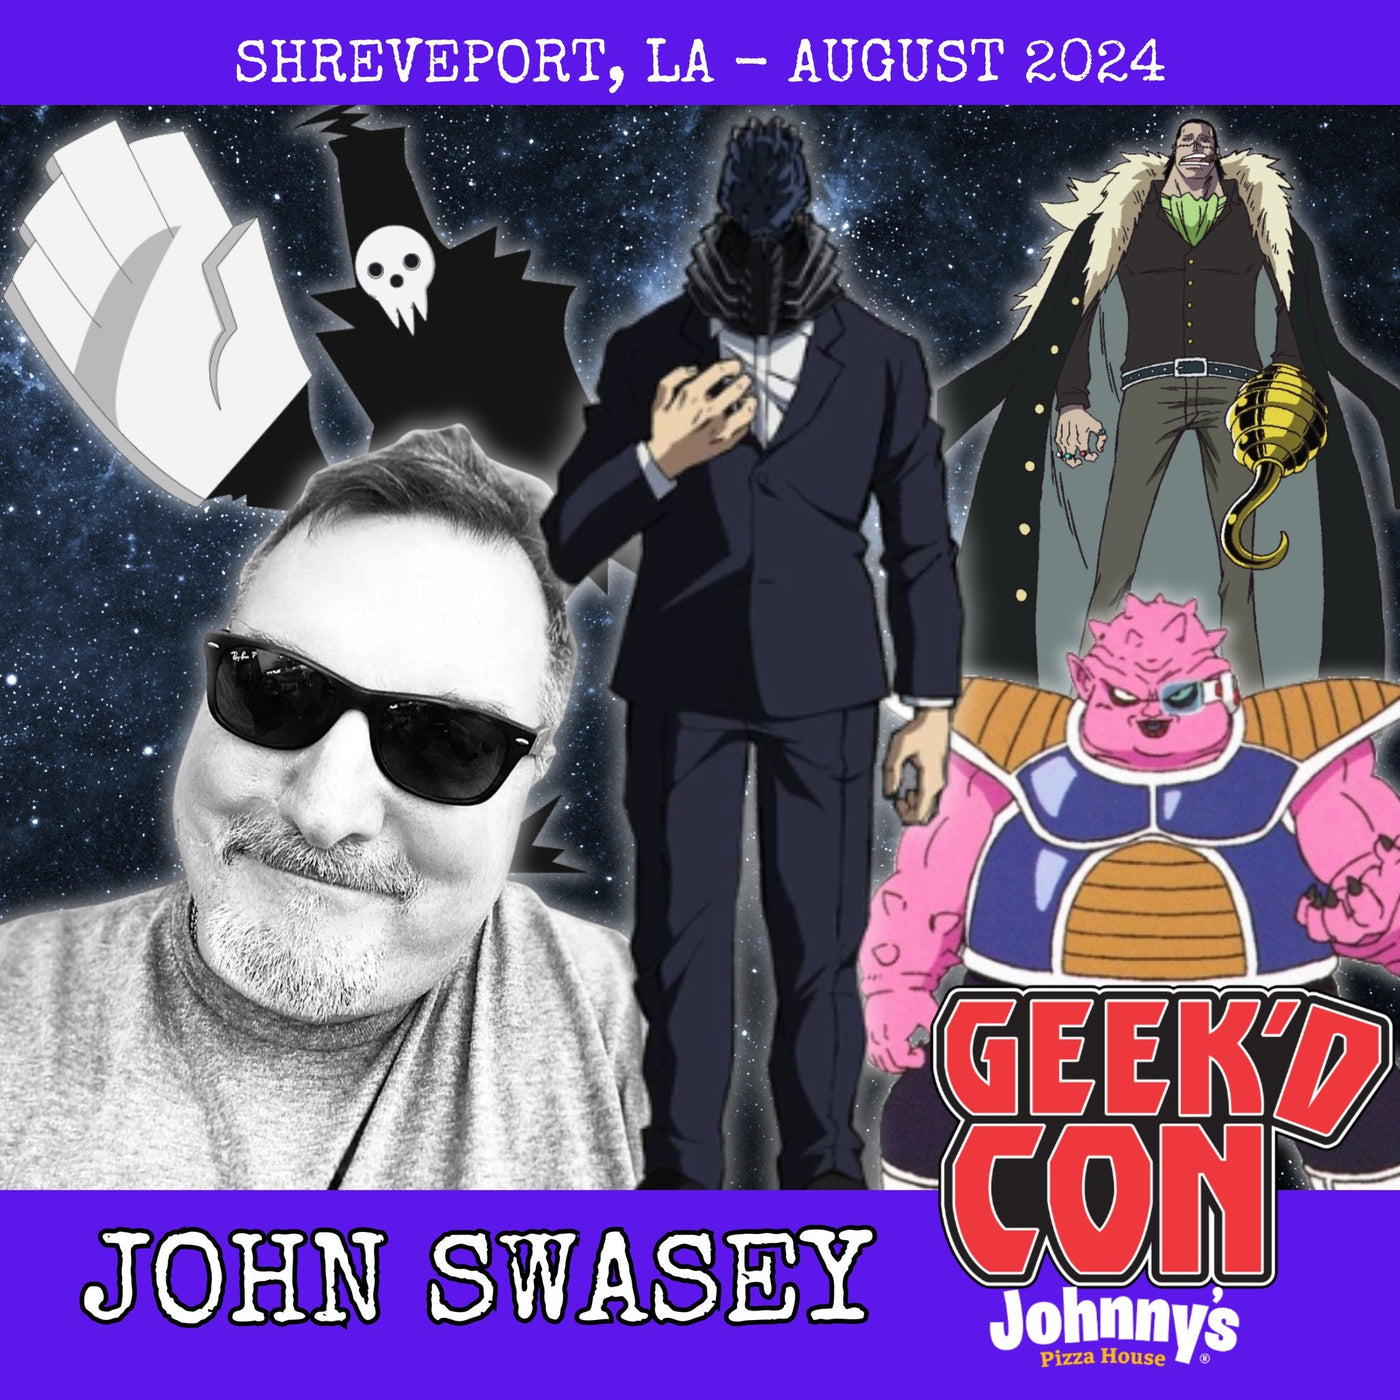 John Swasey Official Autograph Mail-In Service - Geek'd Con 2024